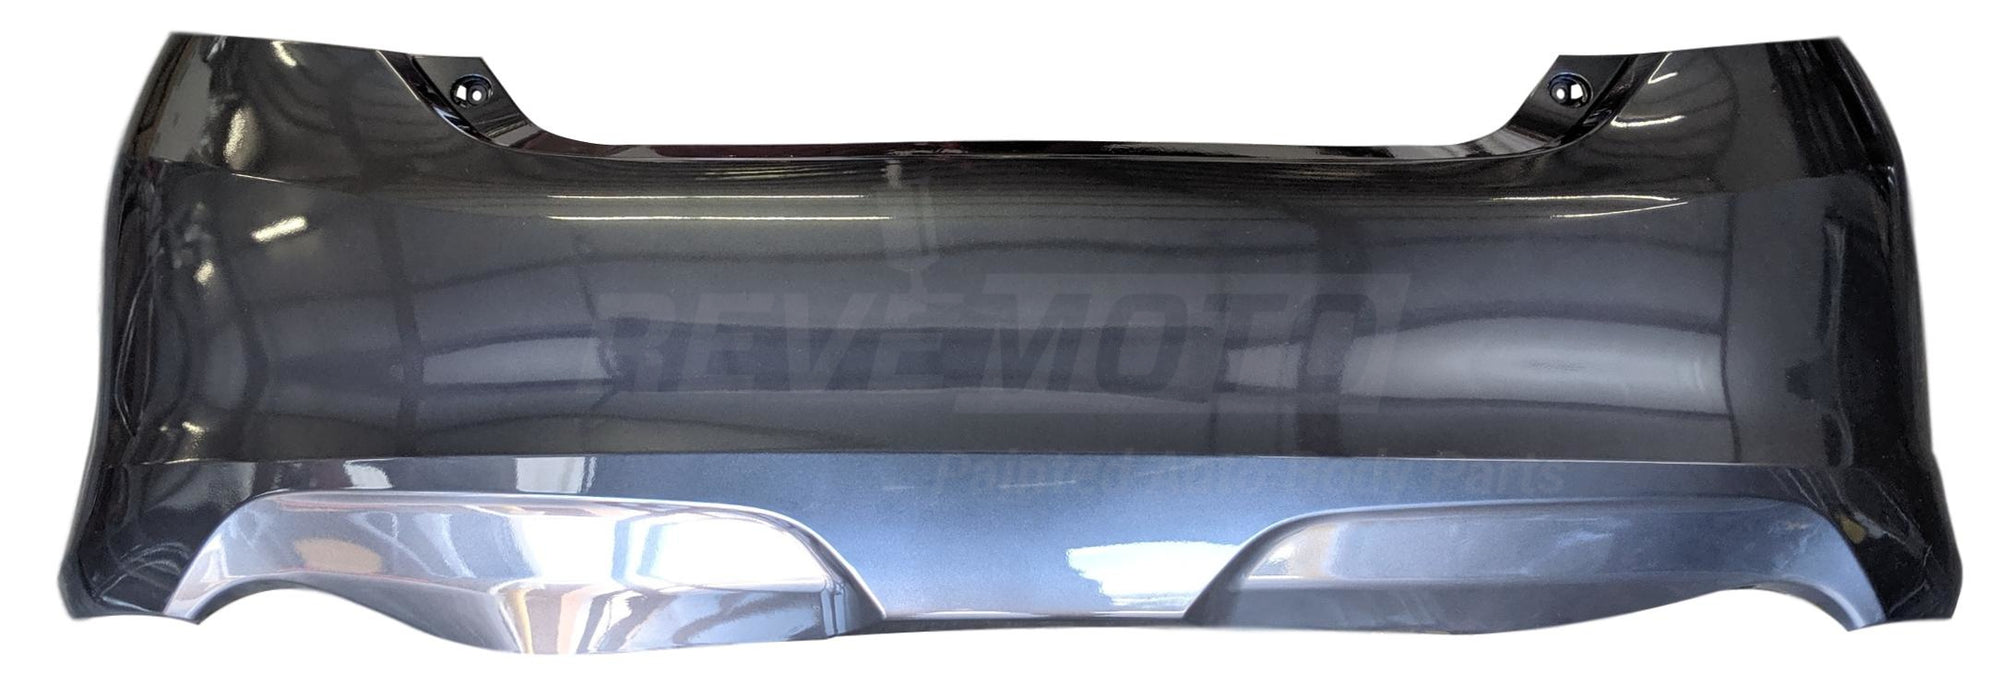 2013 Toyota Camry Rear Bumper Cover, SE ,SE Sport Models; Made of Plastic, Painted Magnetic Gray Metallic (1G3)